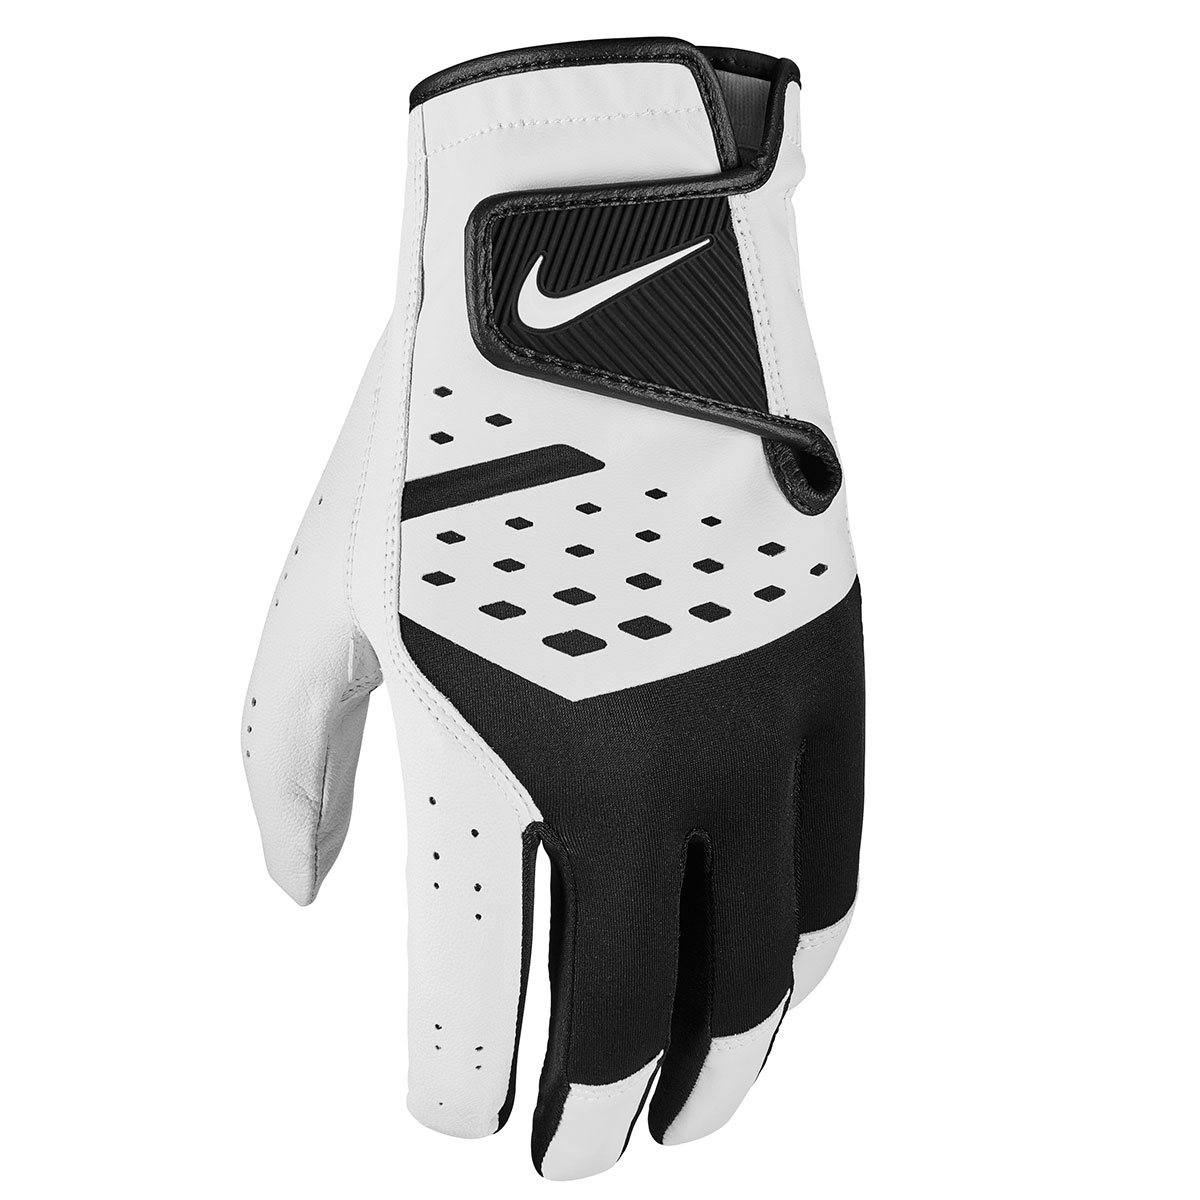 Nike Golf Tech Extreme VII Glove from 